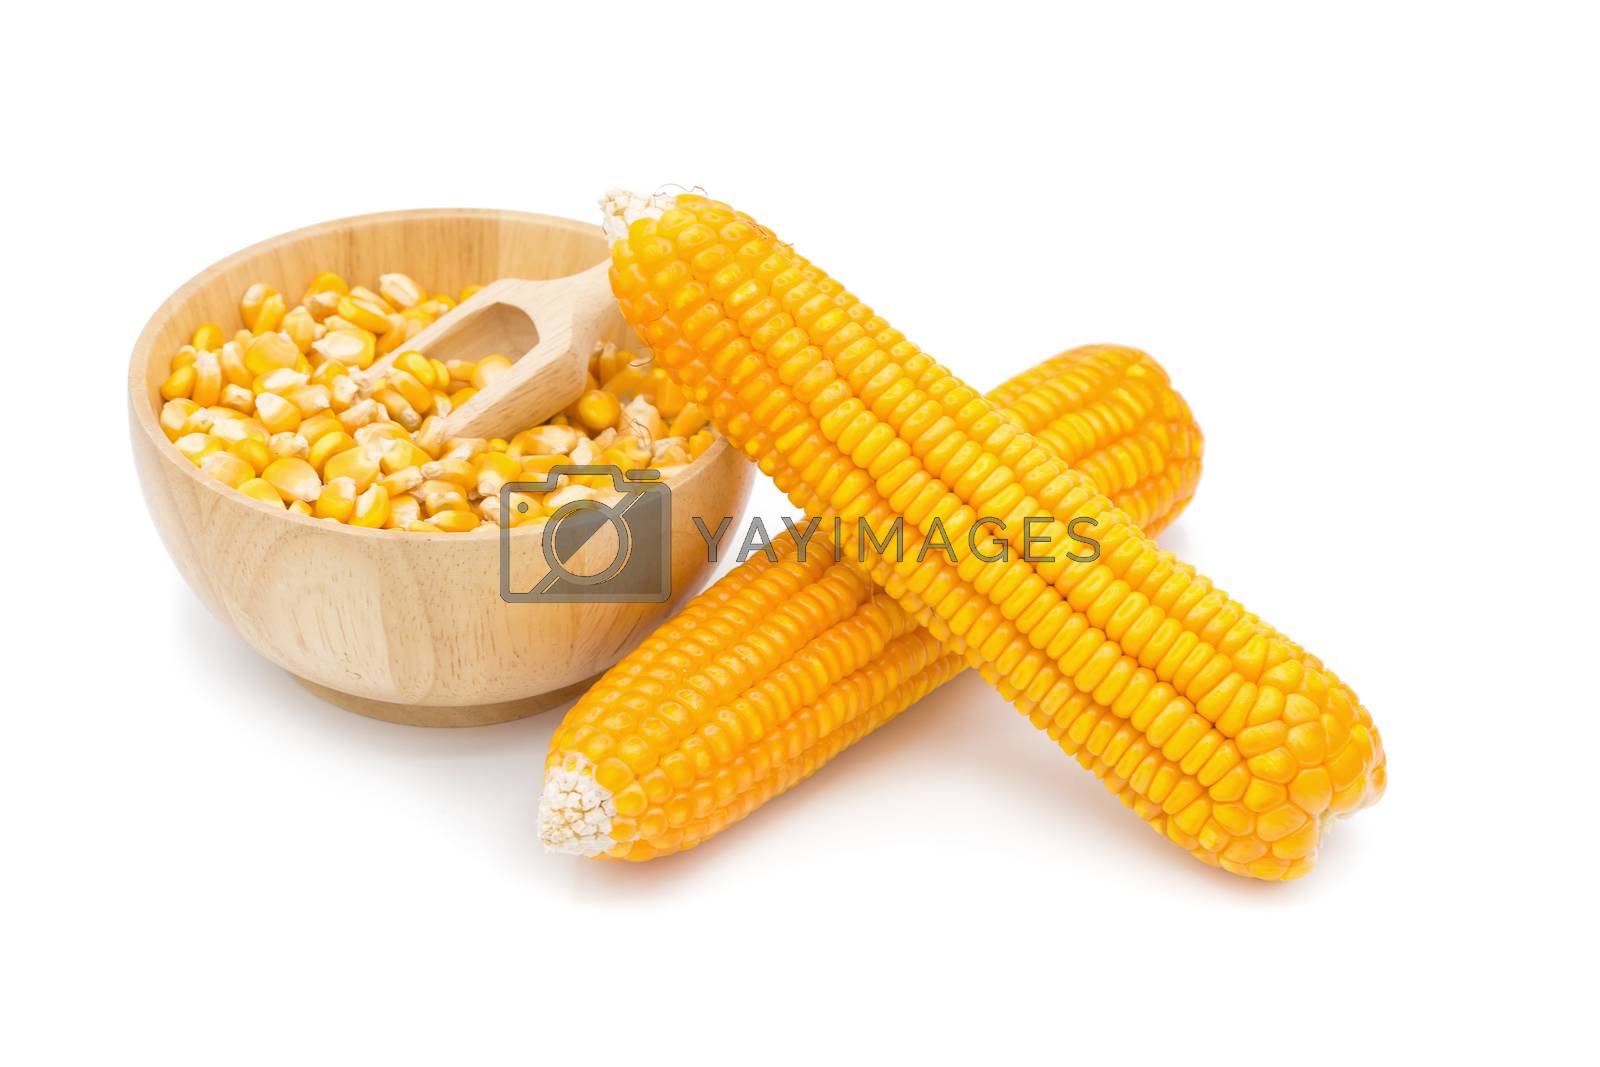 Royalty free image of Dried corn maize isolated on the white background by kaiskynet